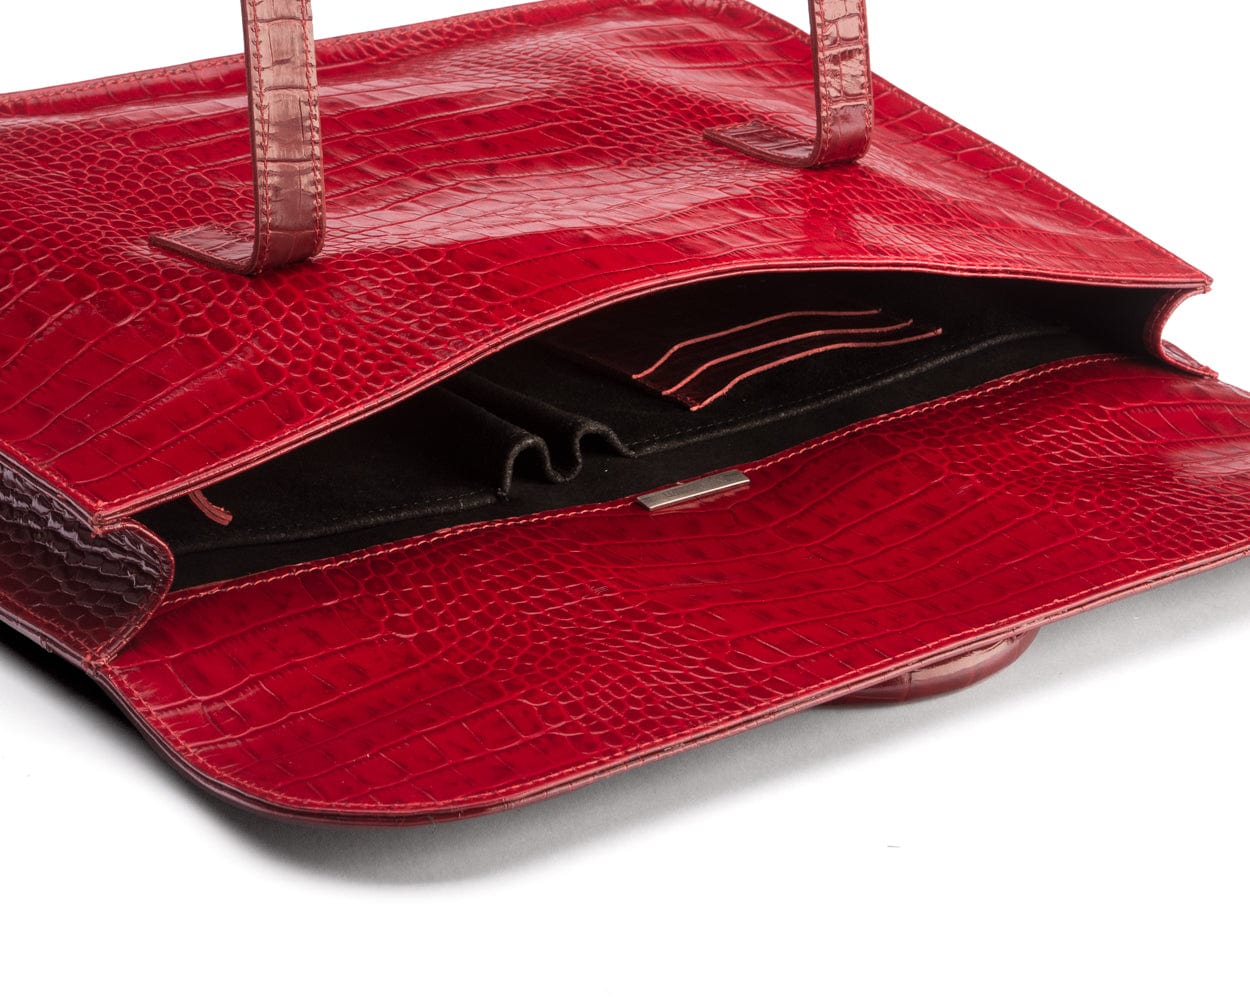 Leather music bag, red croc, inside